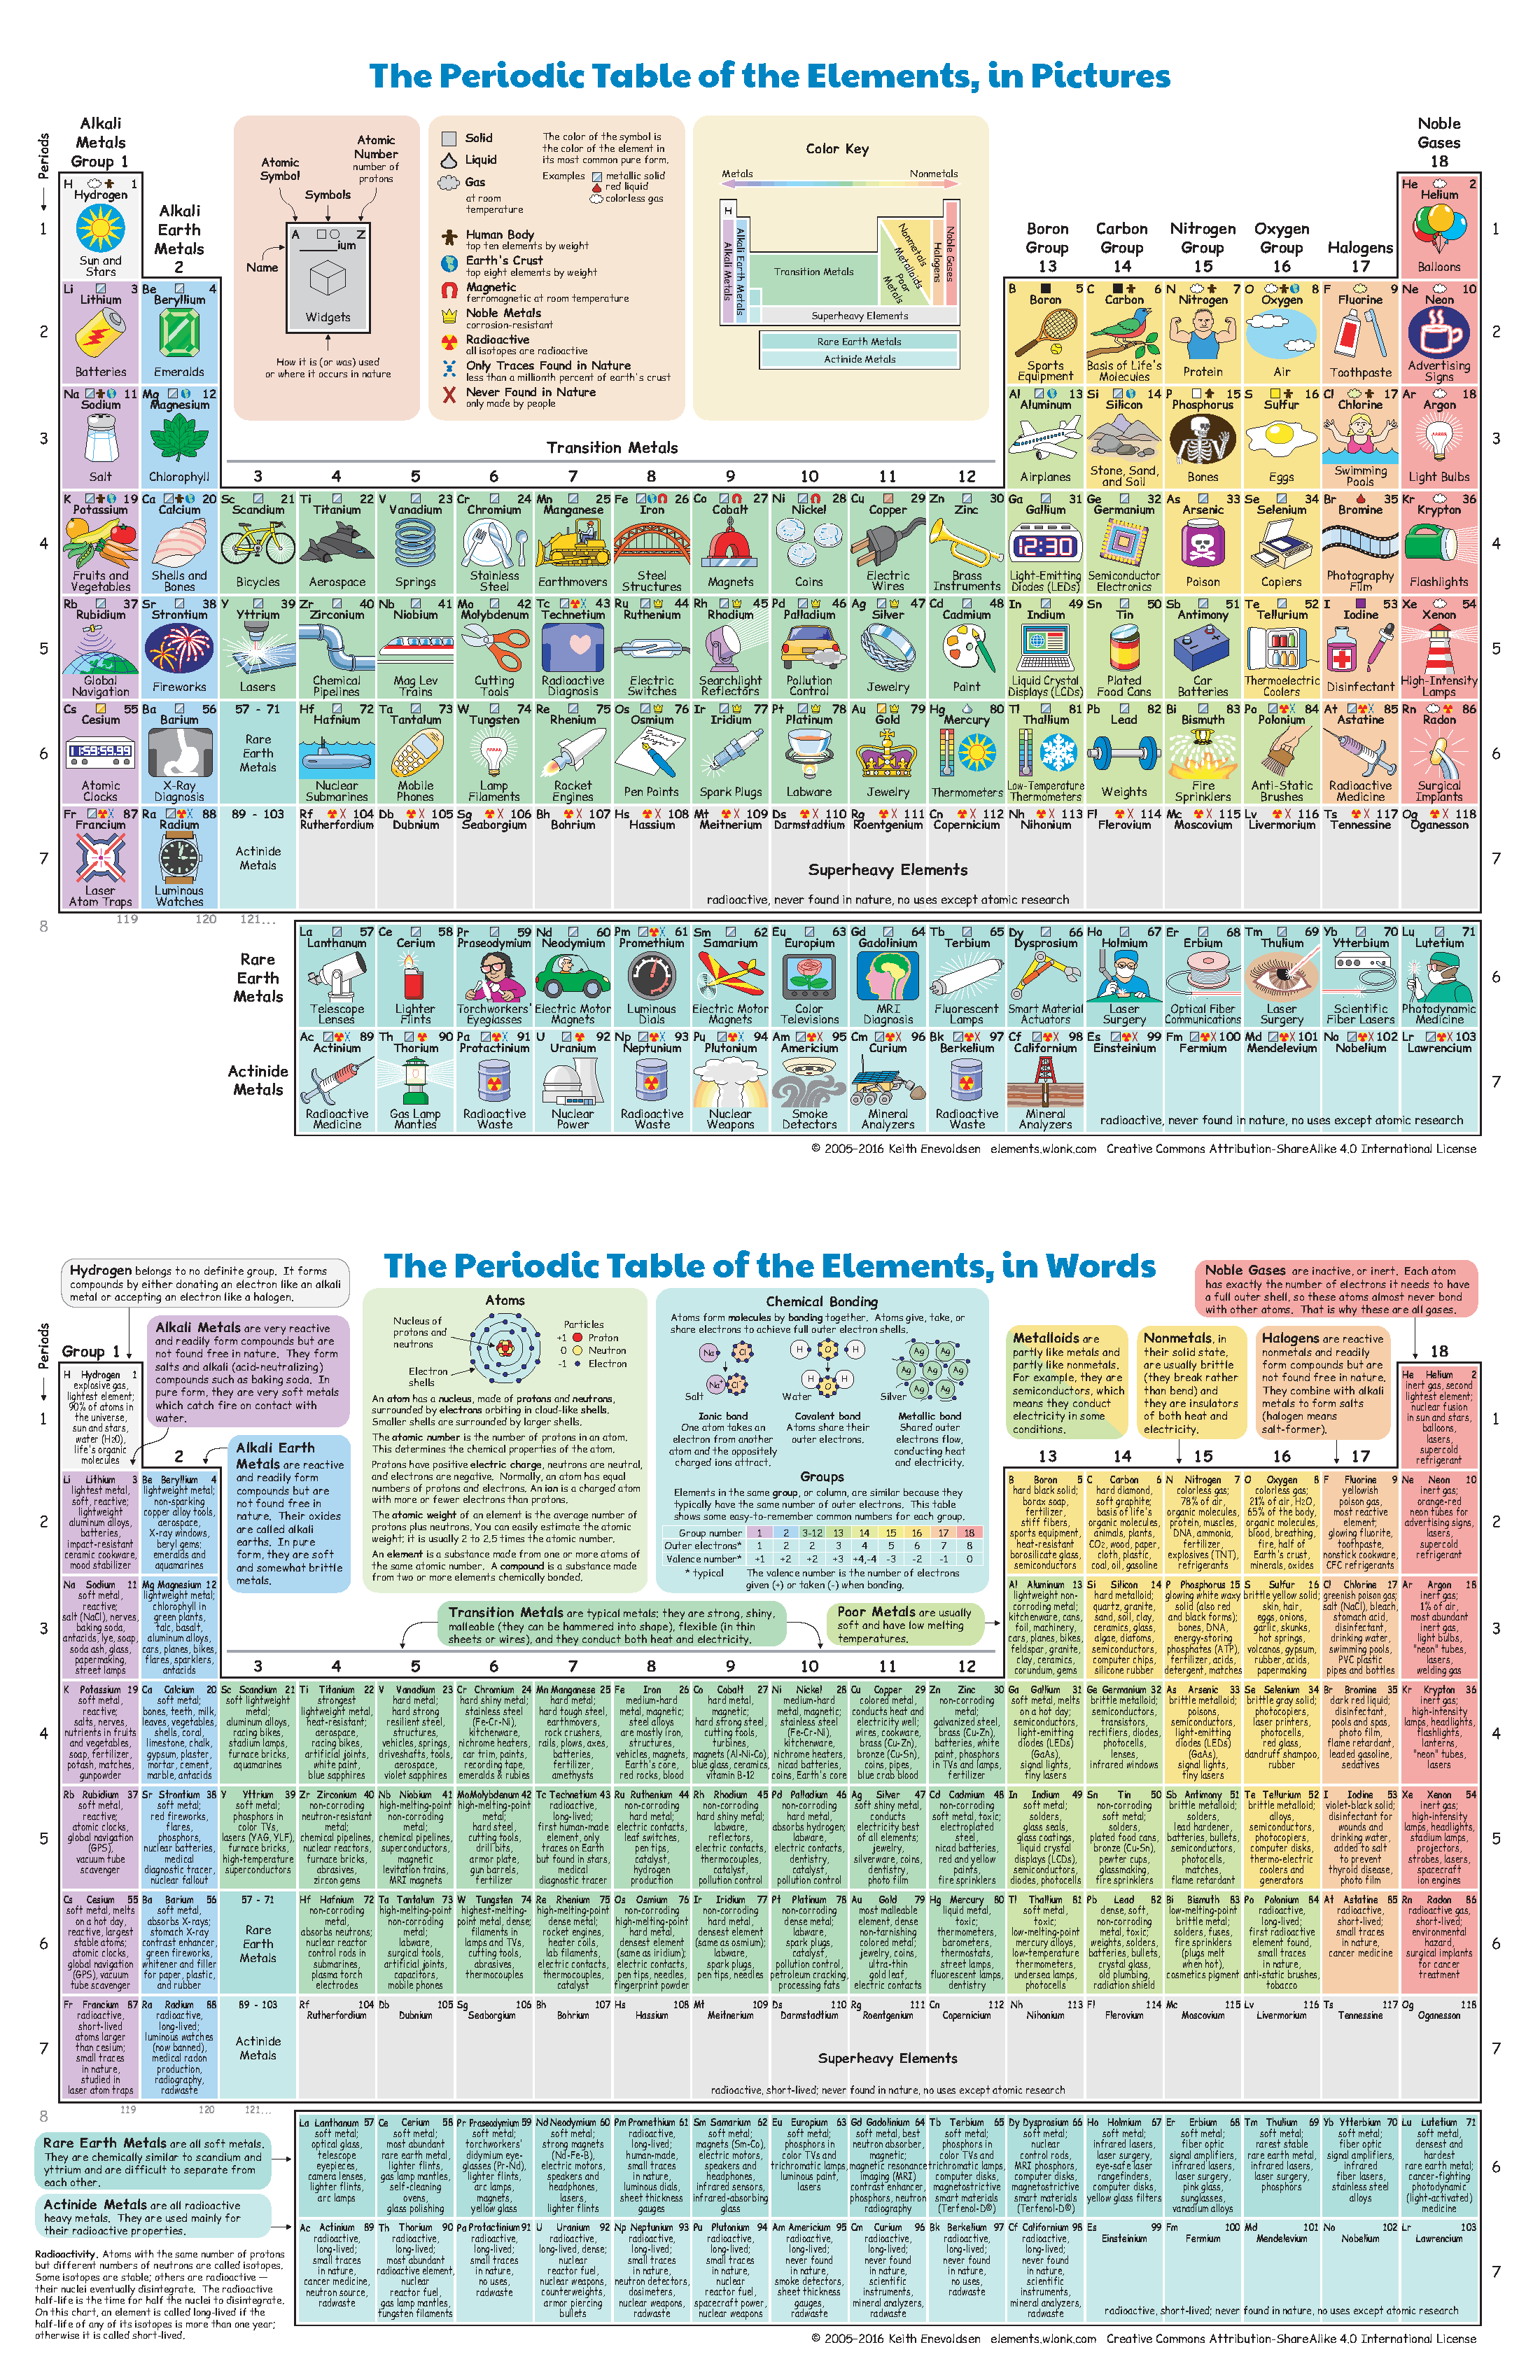 File:The Periodic Table of the Elements, in pictures and words.png - Wikimedia Commons